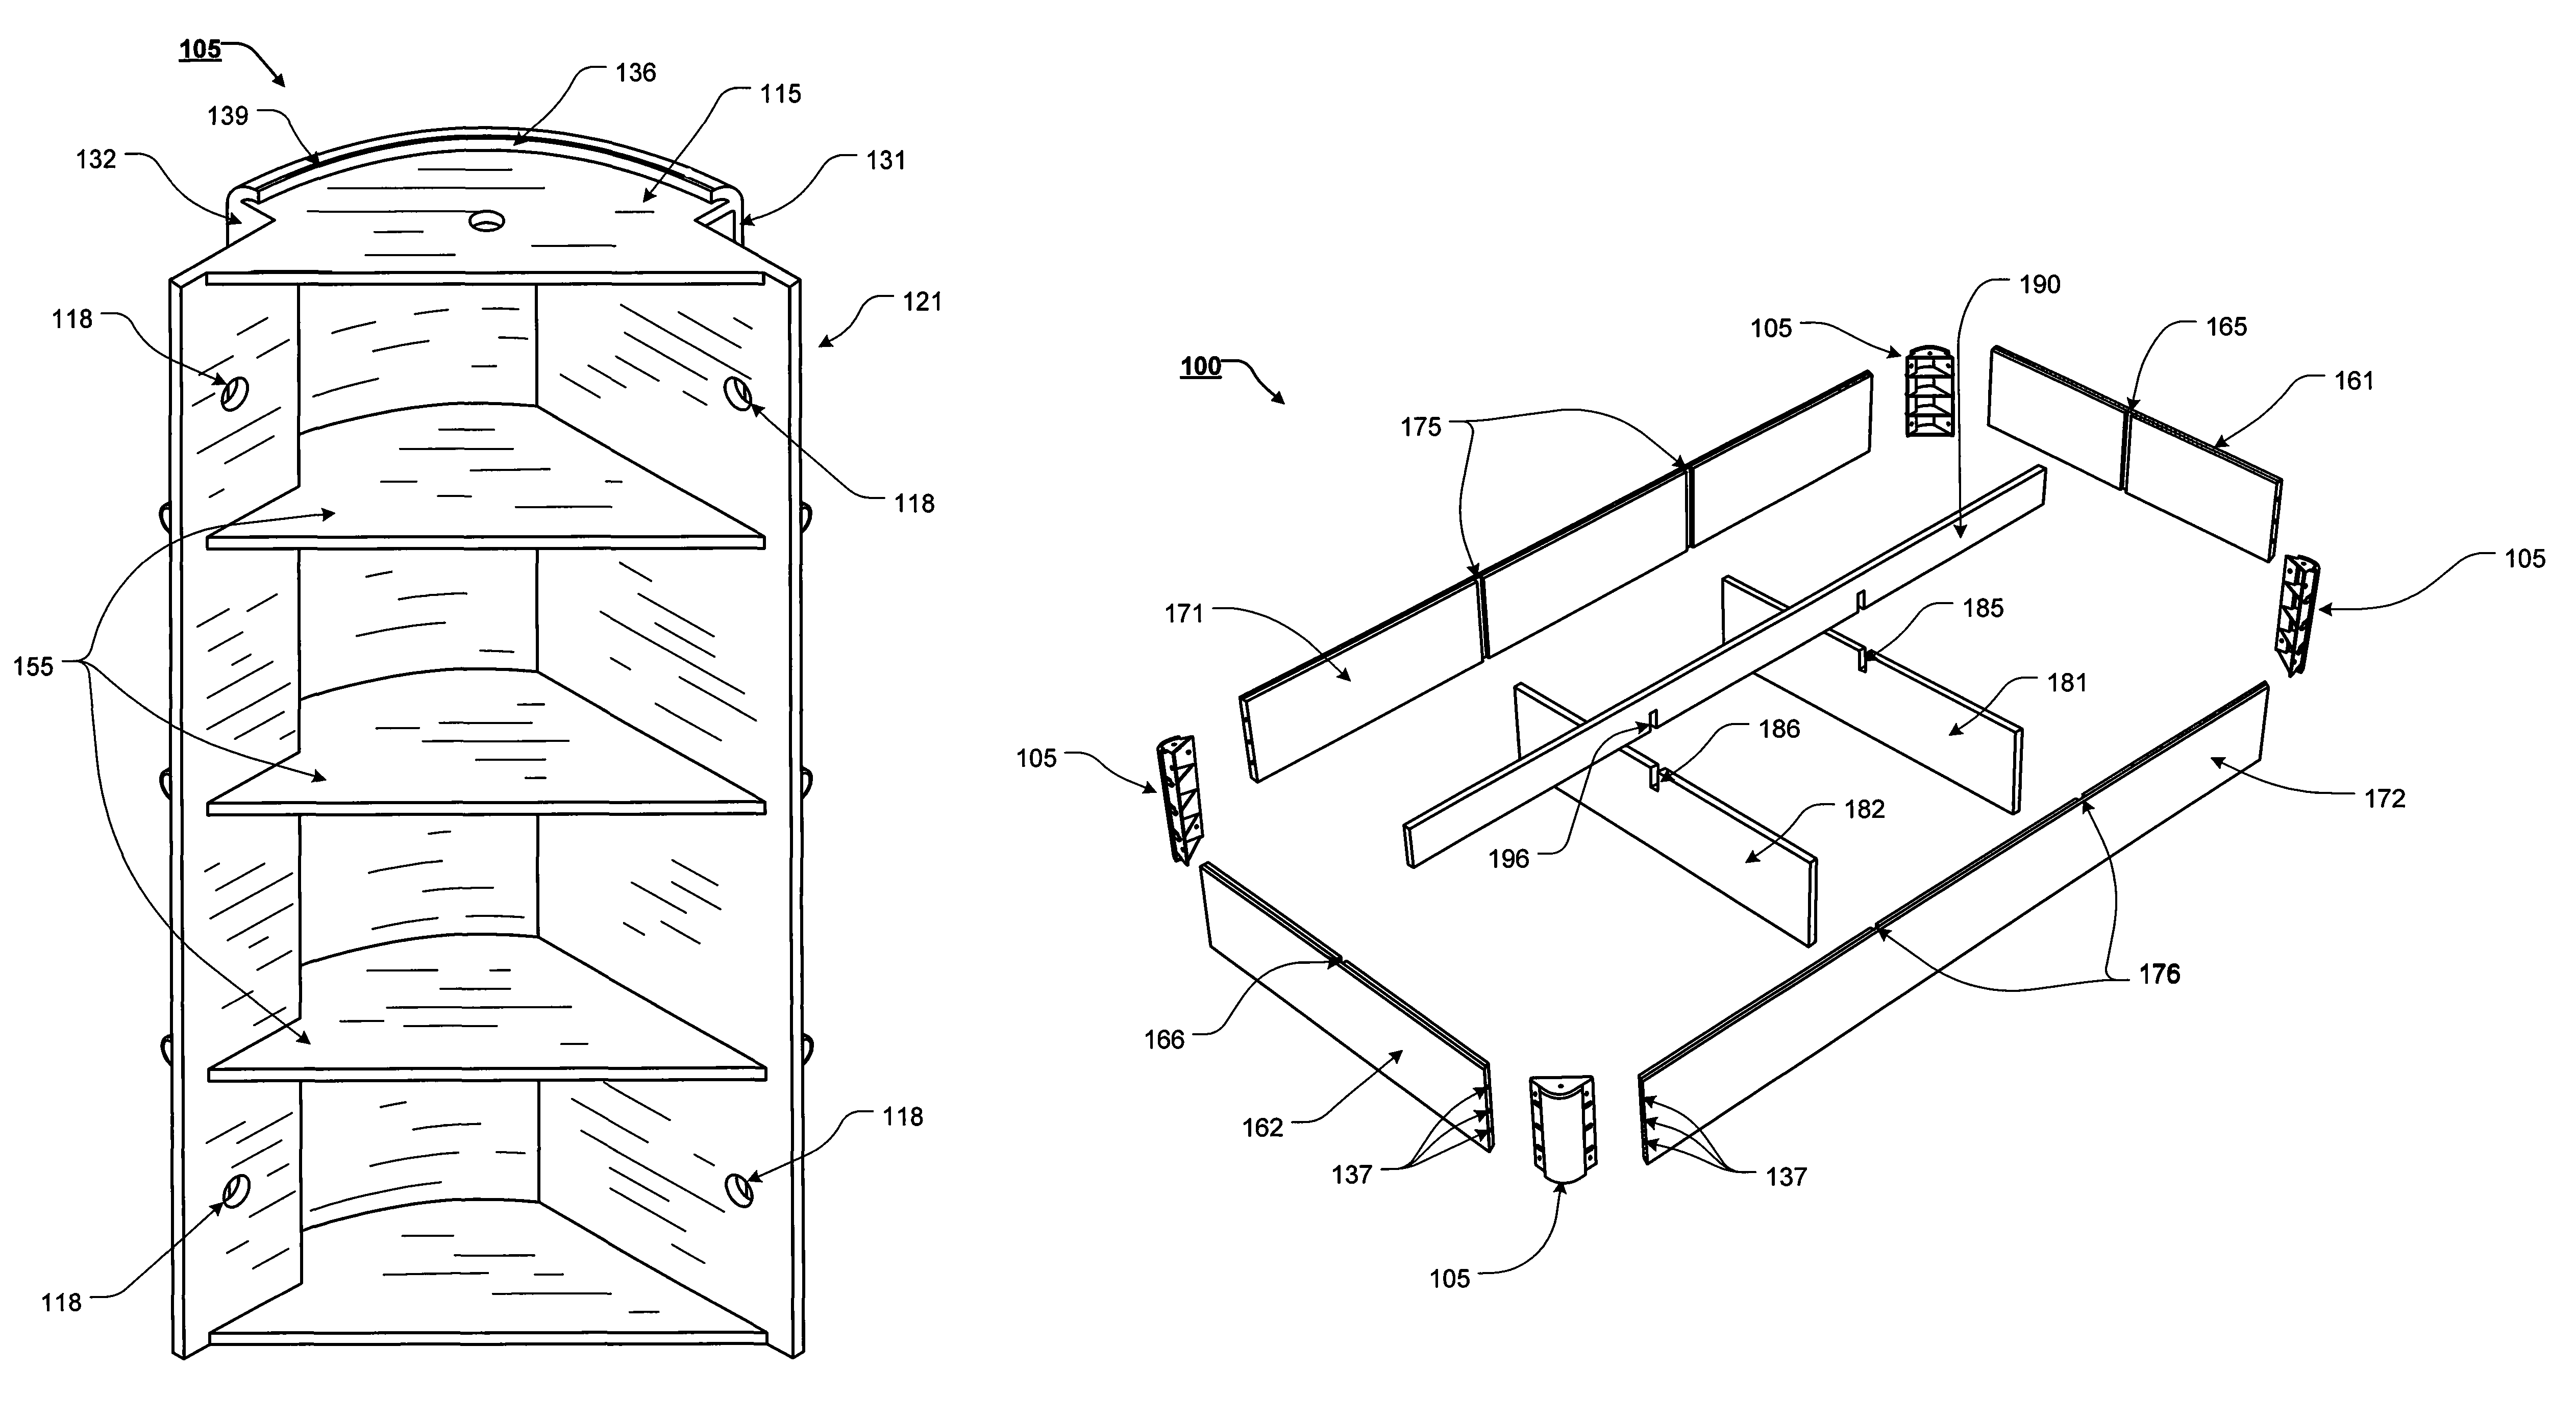 Mattress foundation corner connector and bed frame assembly